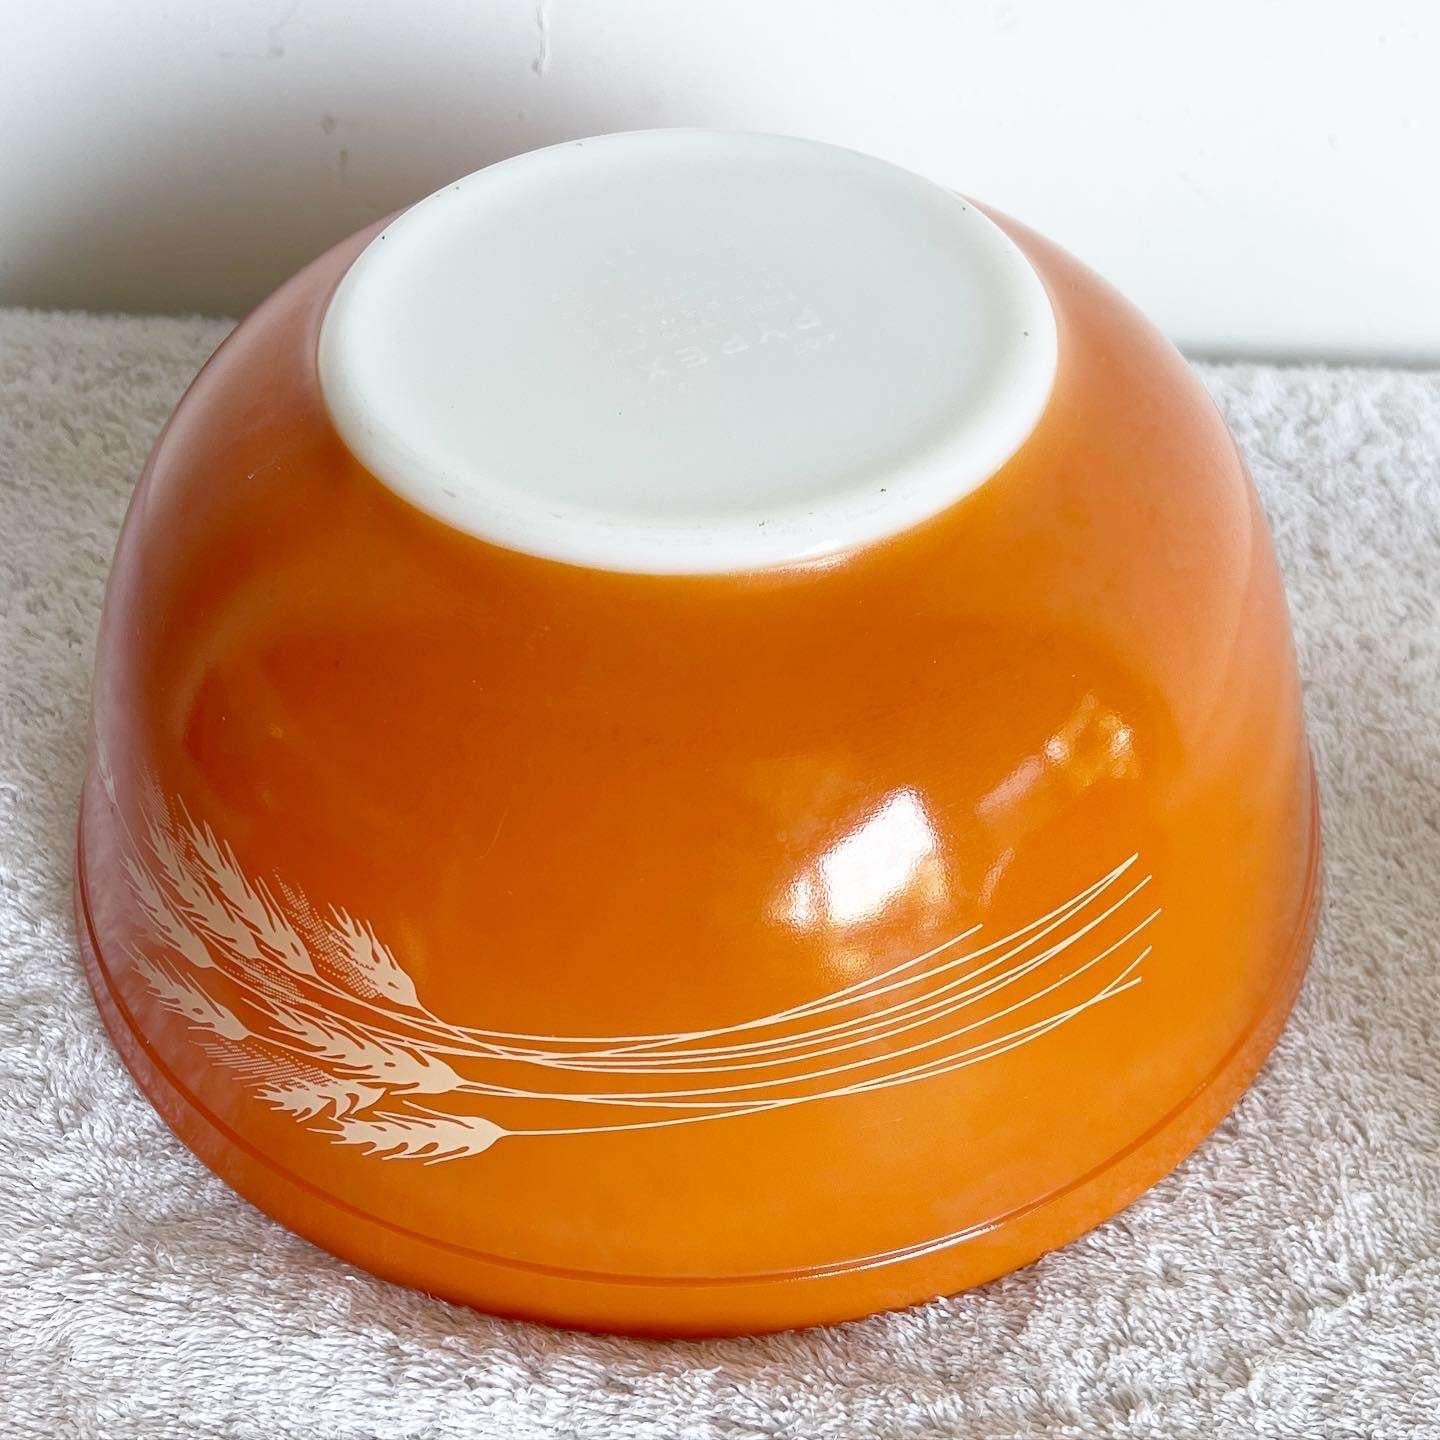 Vintage Autumn Harvest Bowls by Pyrex - Set of 3 In Good Condition For Sale In Delray Beach, FL